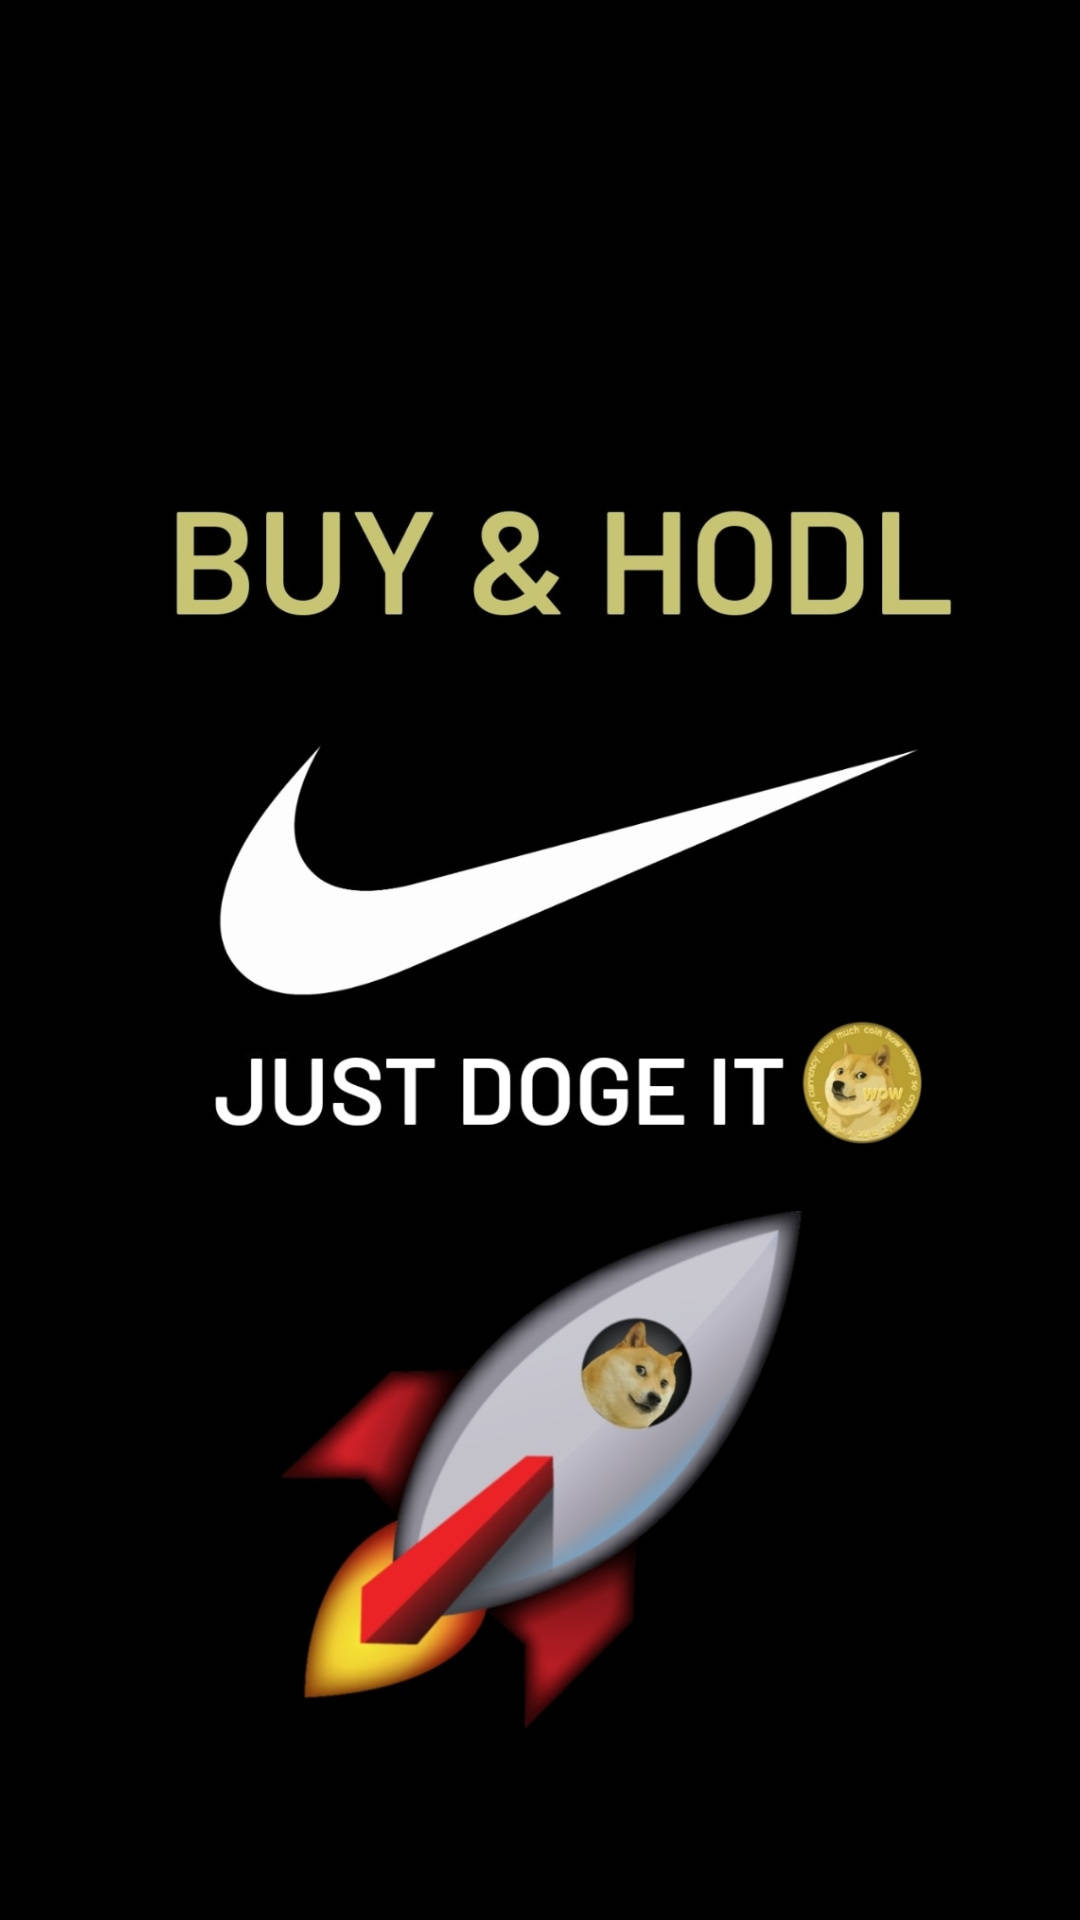 Just Doge It! Background